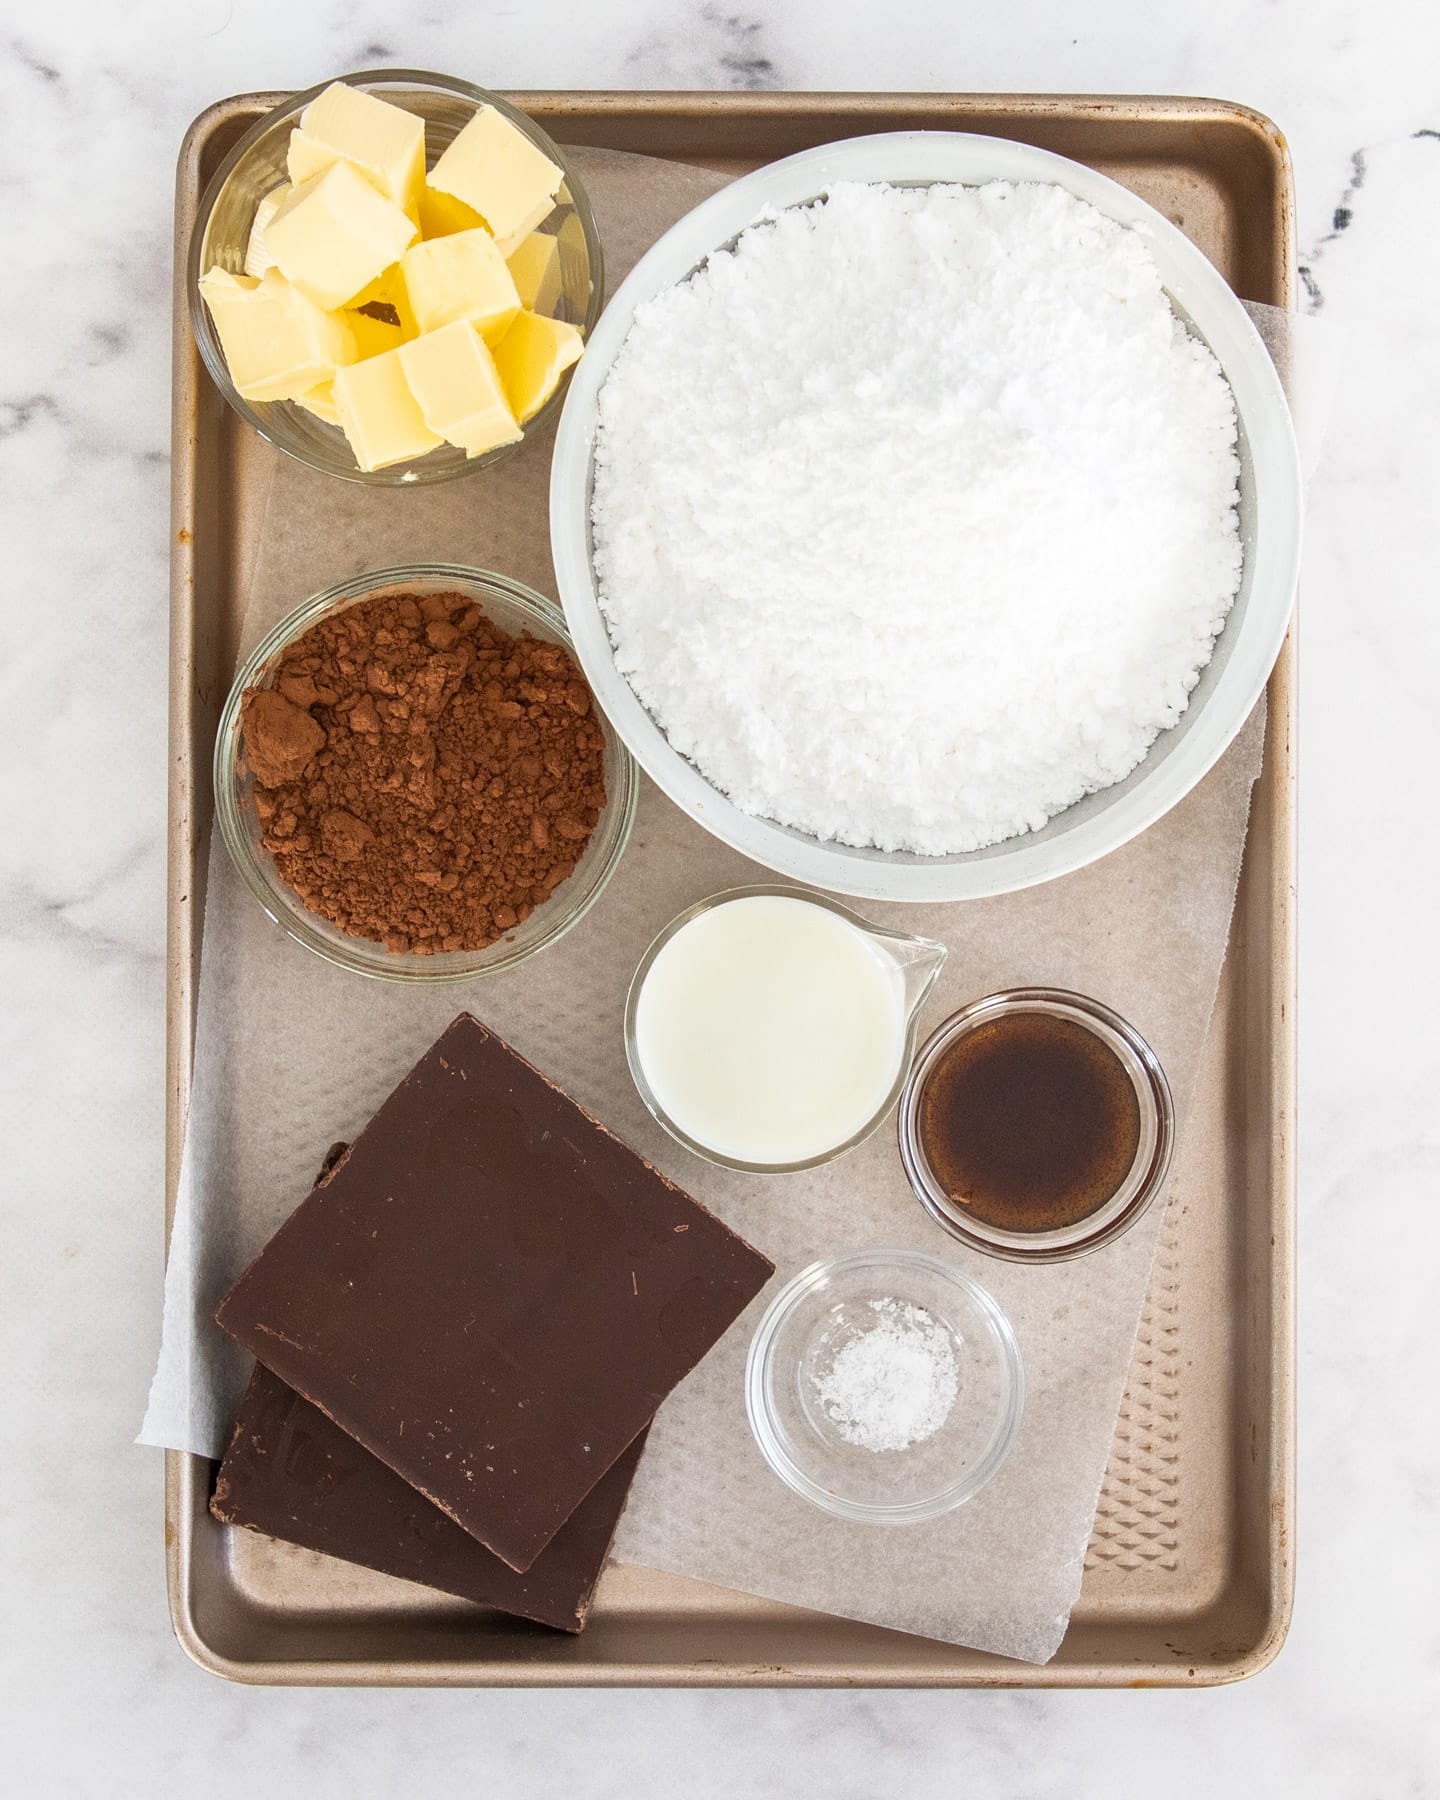 Ingredients for chocolate fudge frosting.